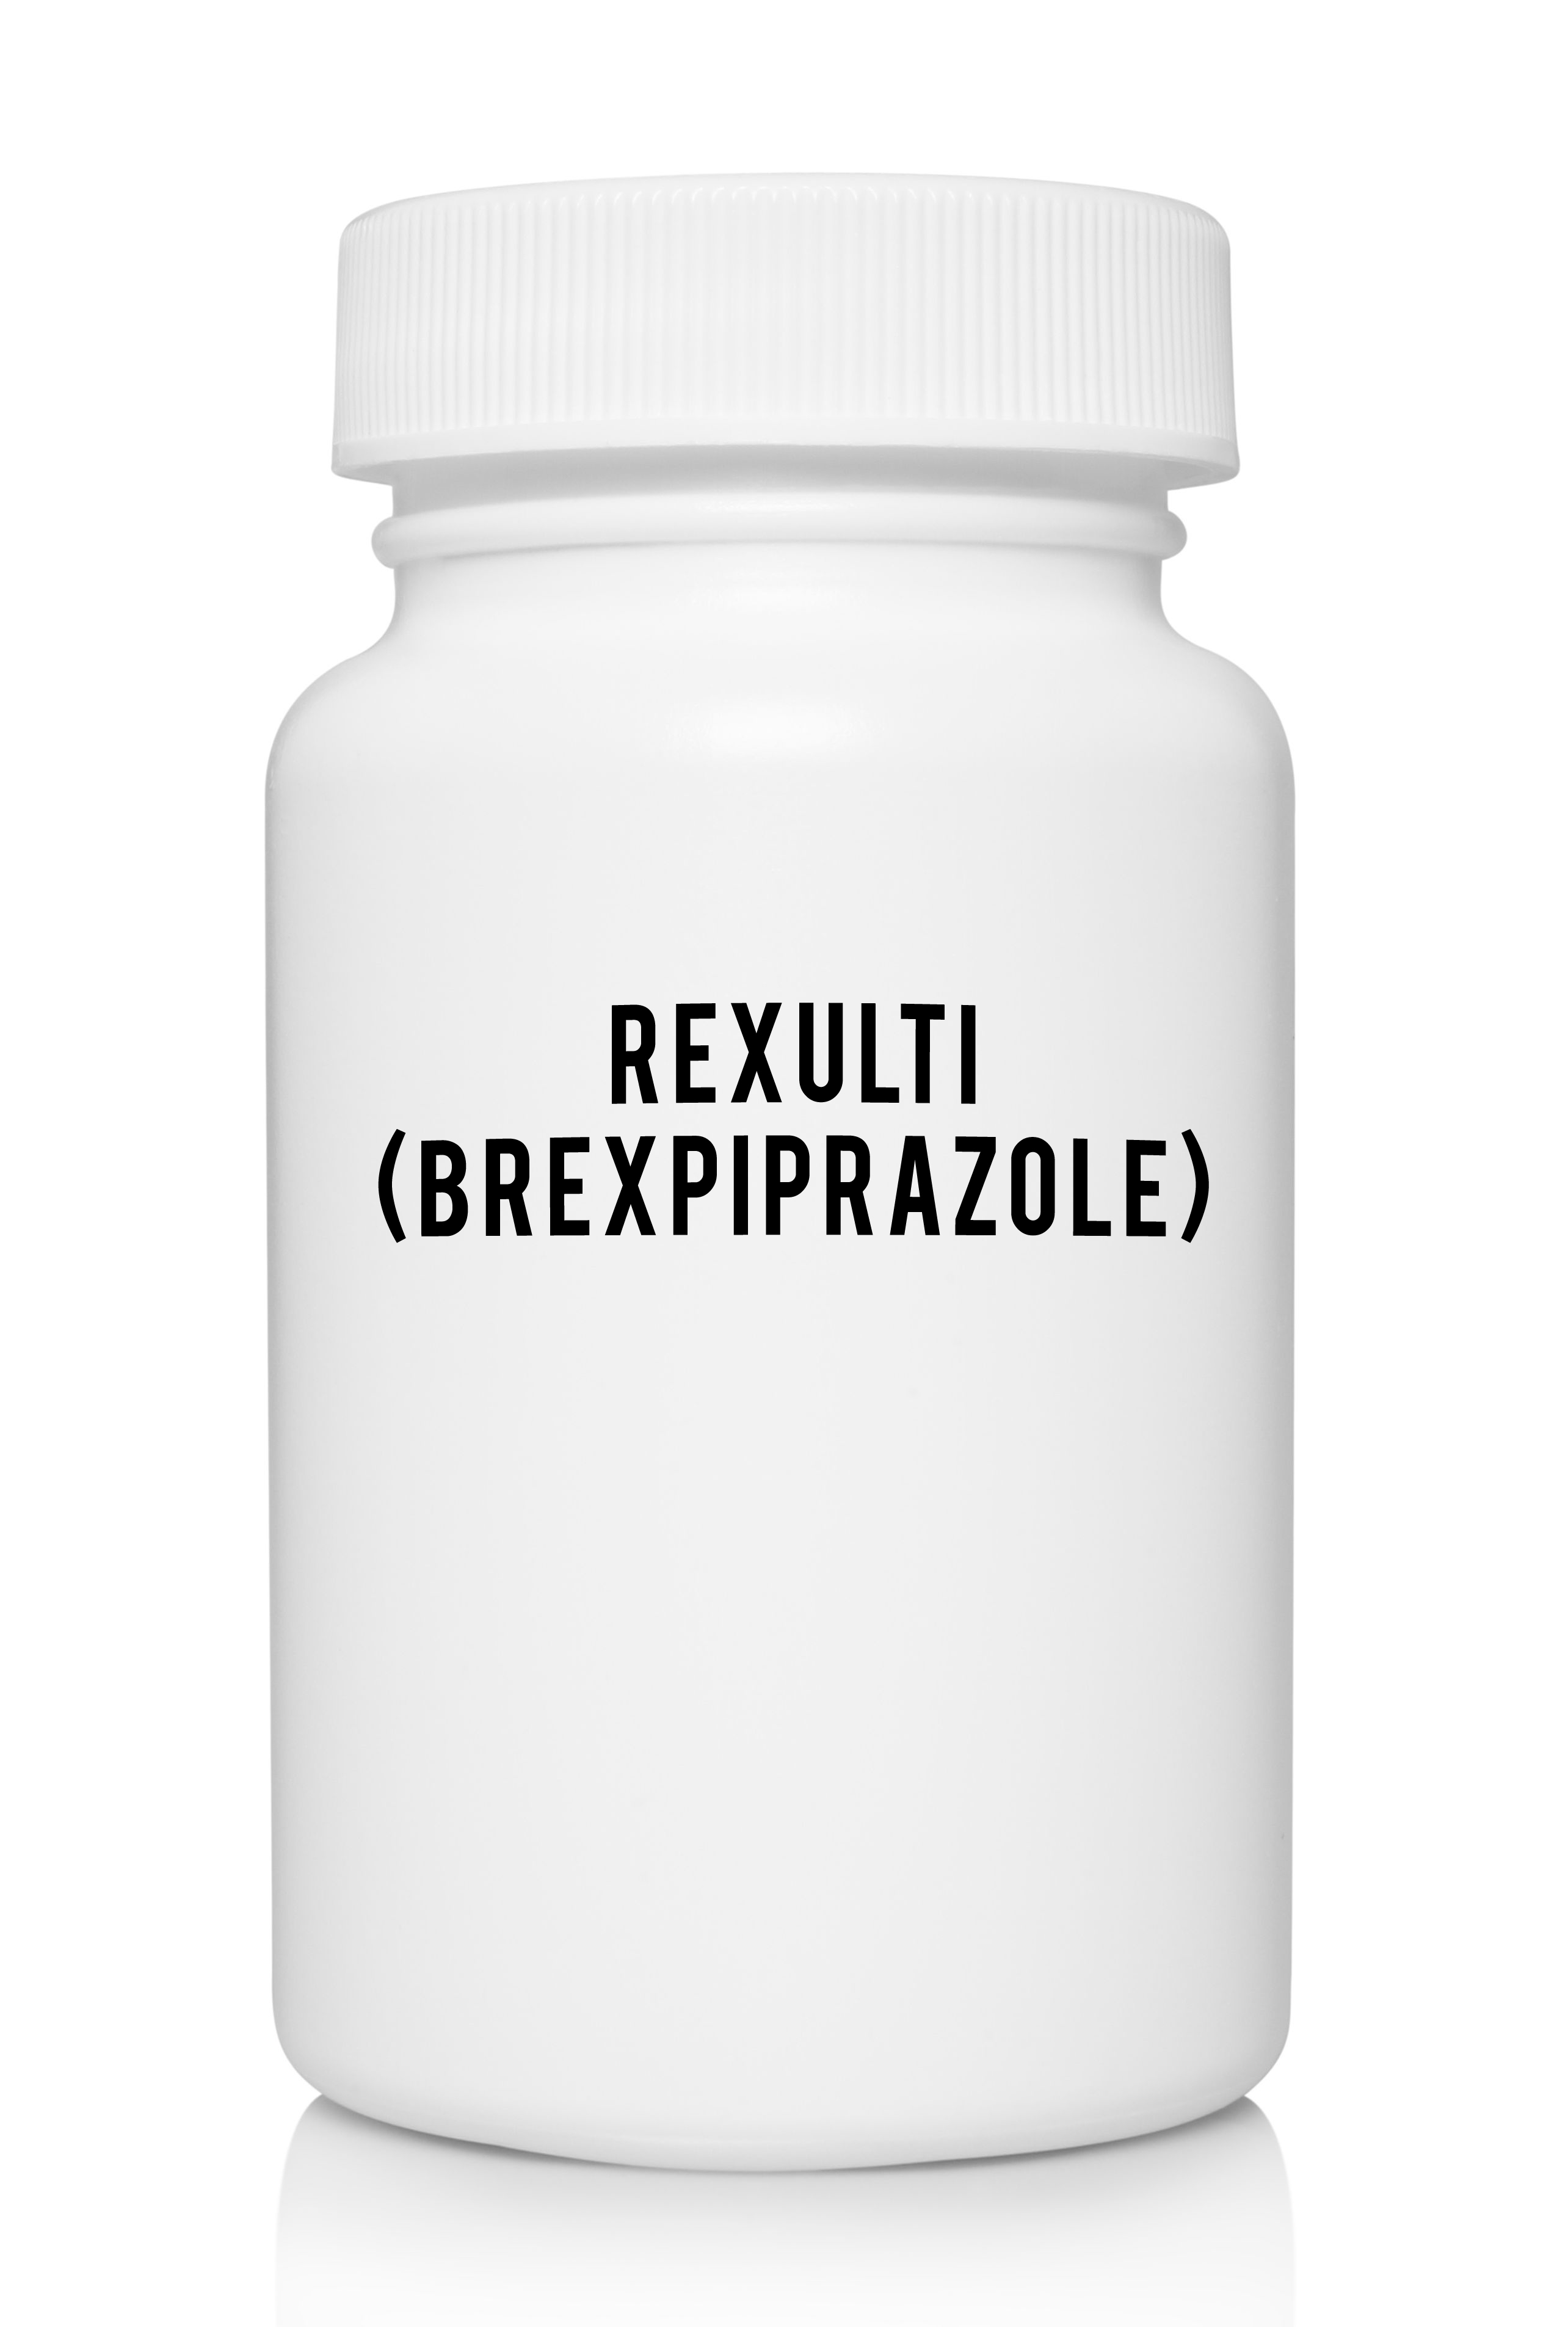 Rexulti For Depression: Benefits, Side Effects & Precautions